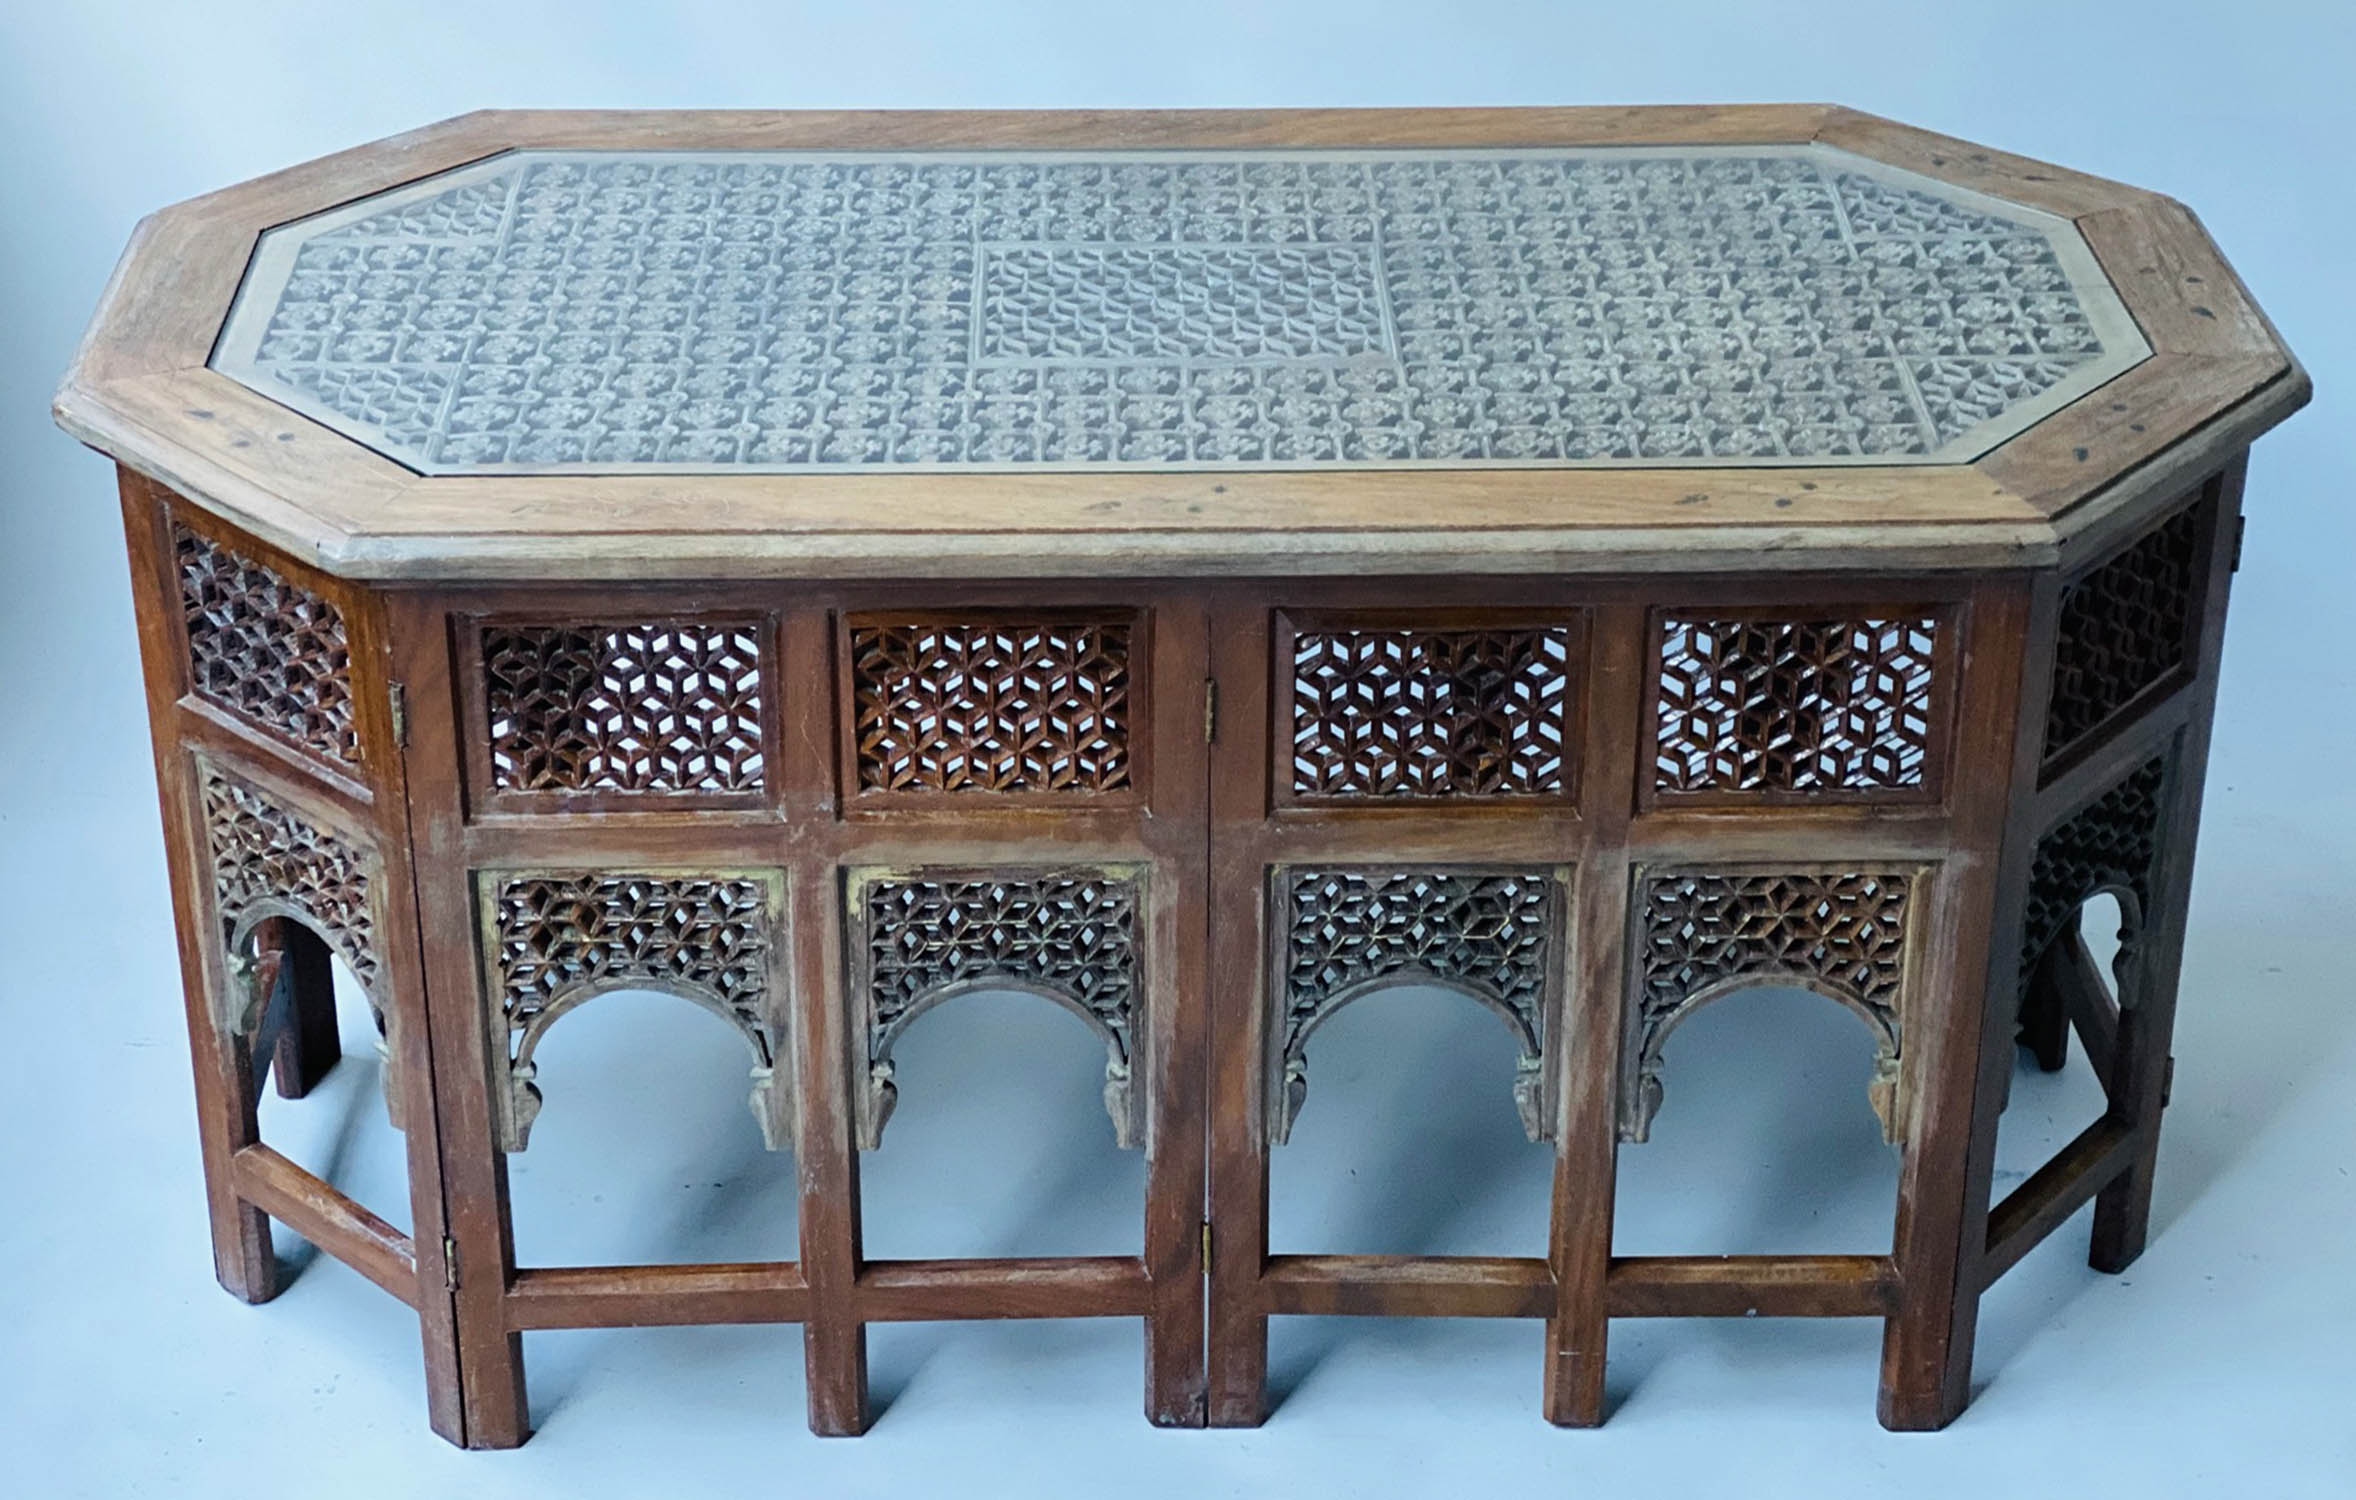 LOW TABLE, vintage Moorish teak and brass inlaid octagonal with pierced inset panels and glass - Image 2 of 7